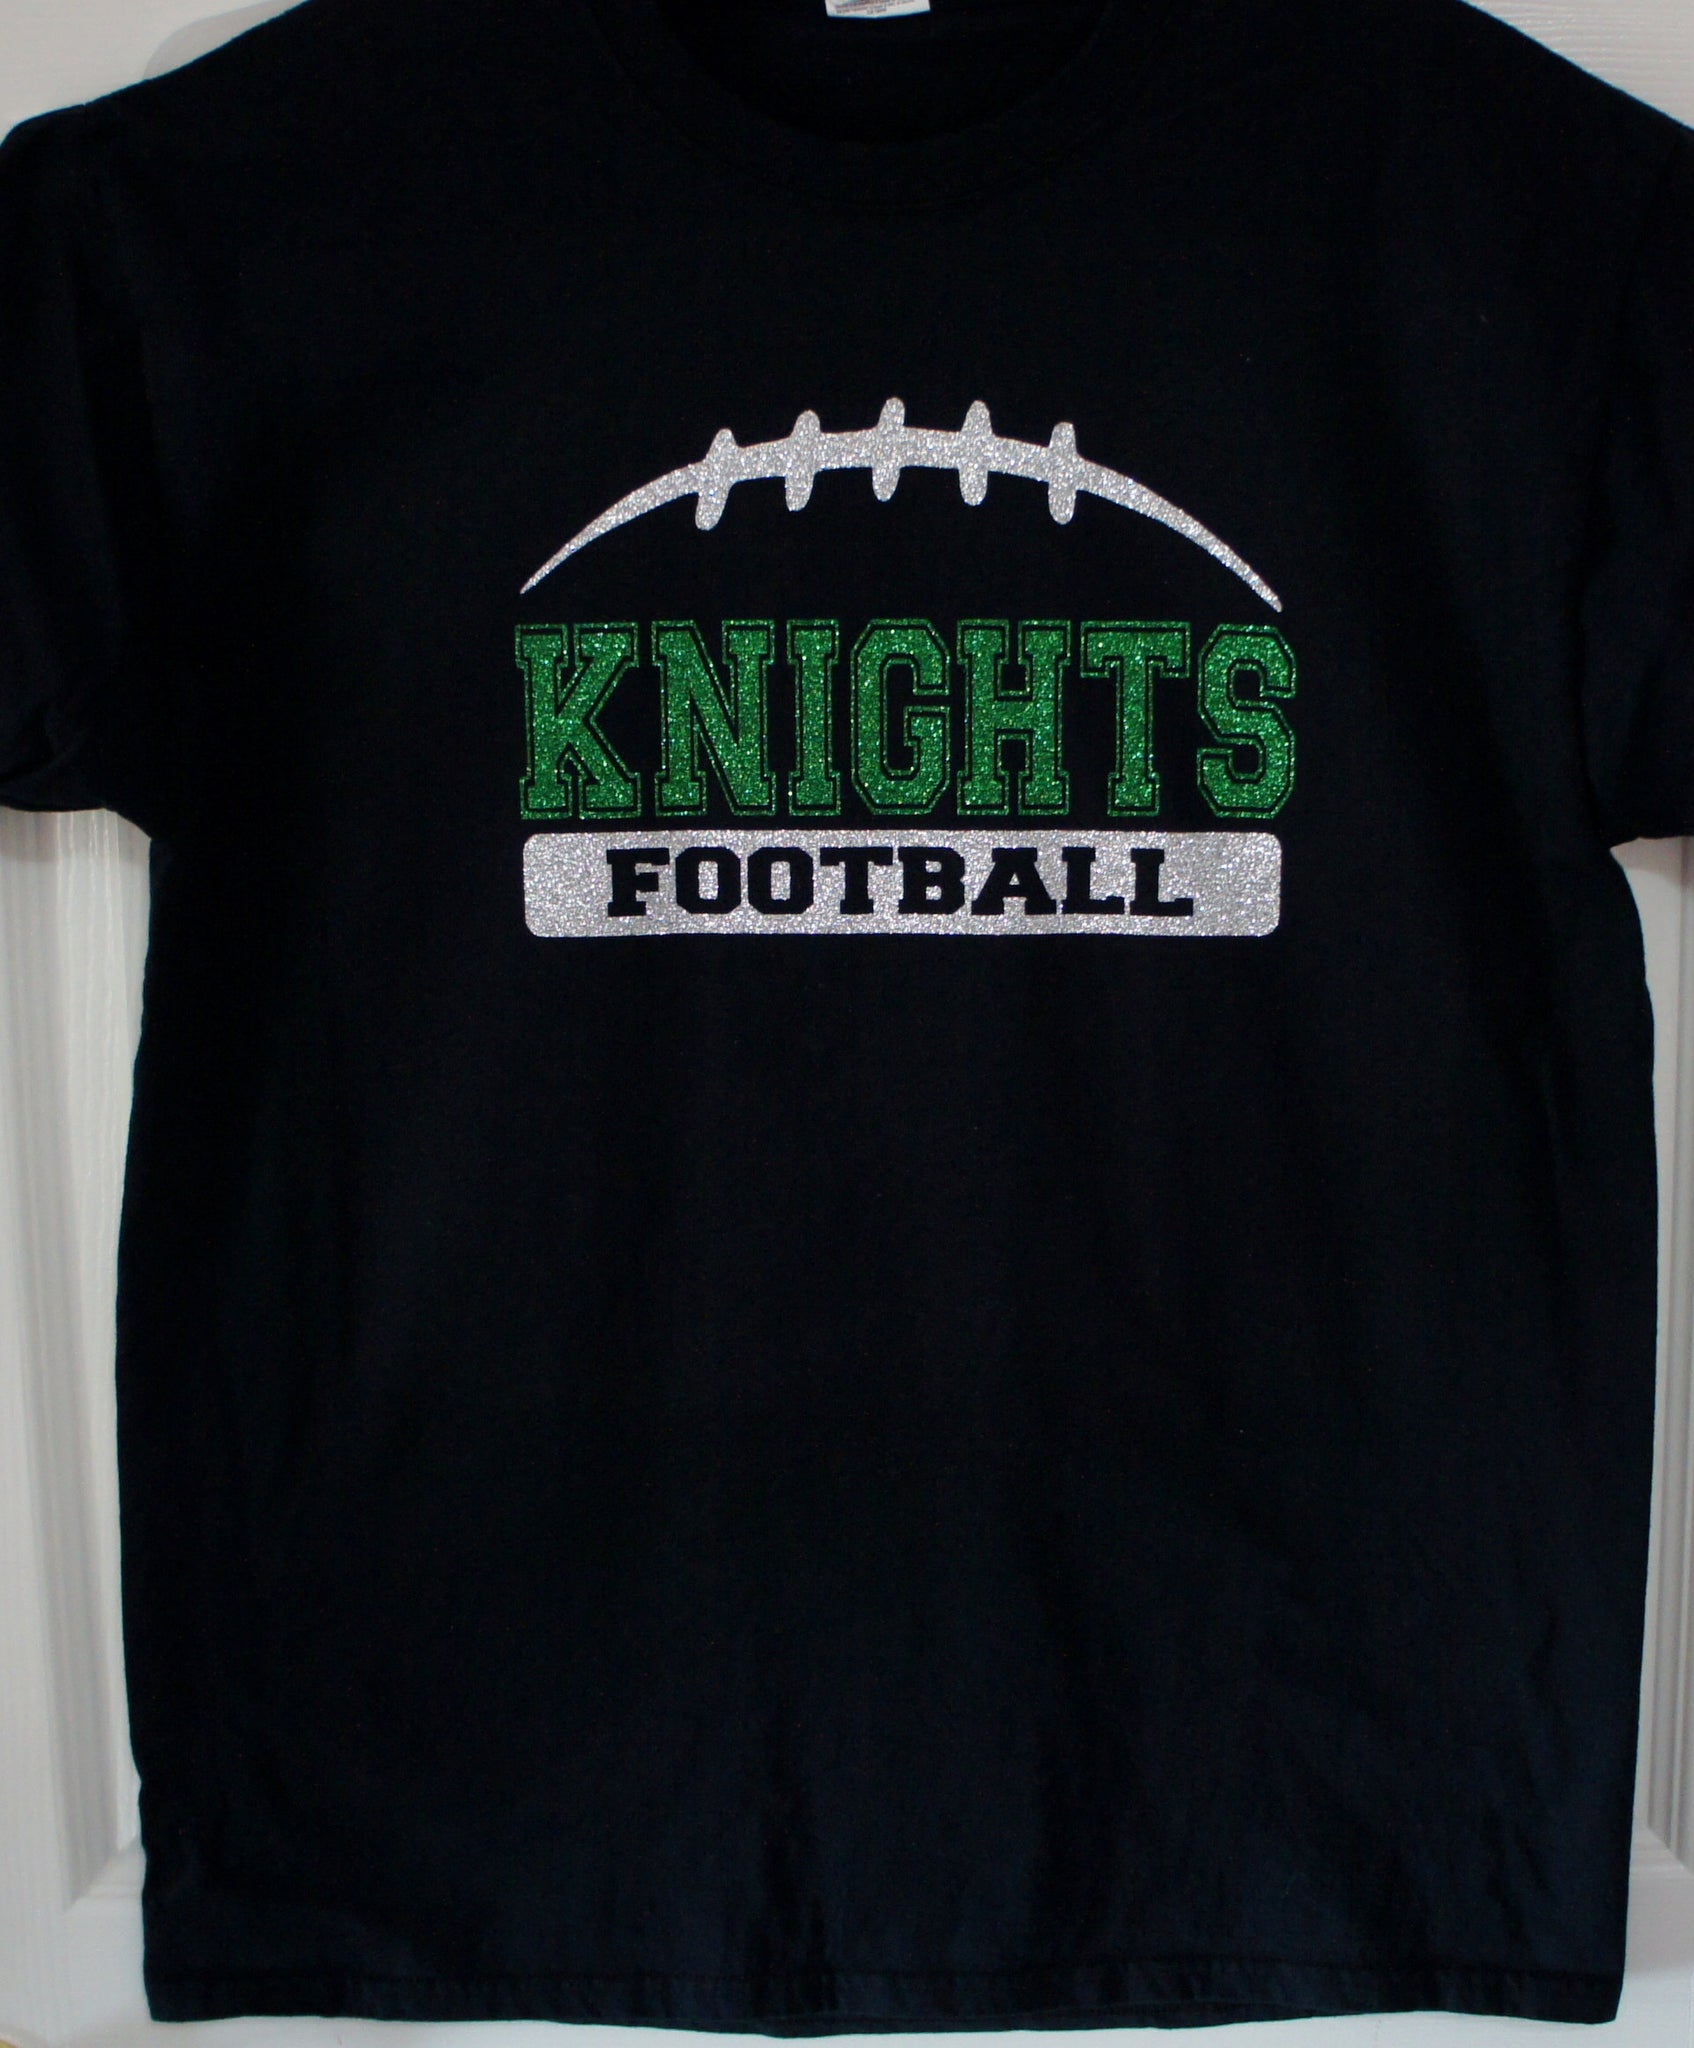 Football Team Shirt - Knights Football Shown. Customize for your team ...